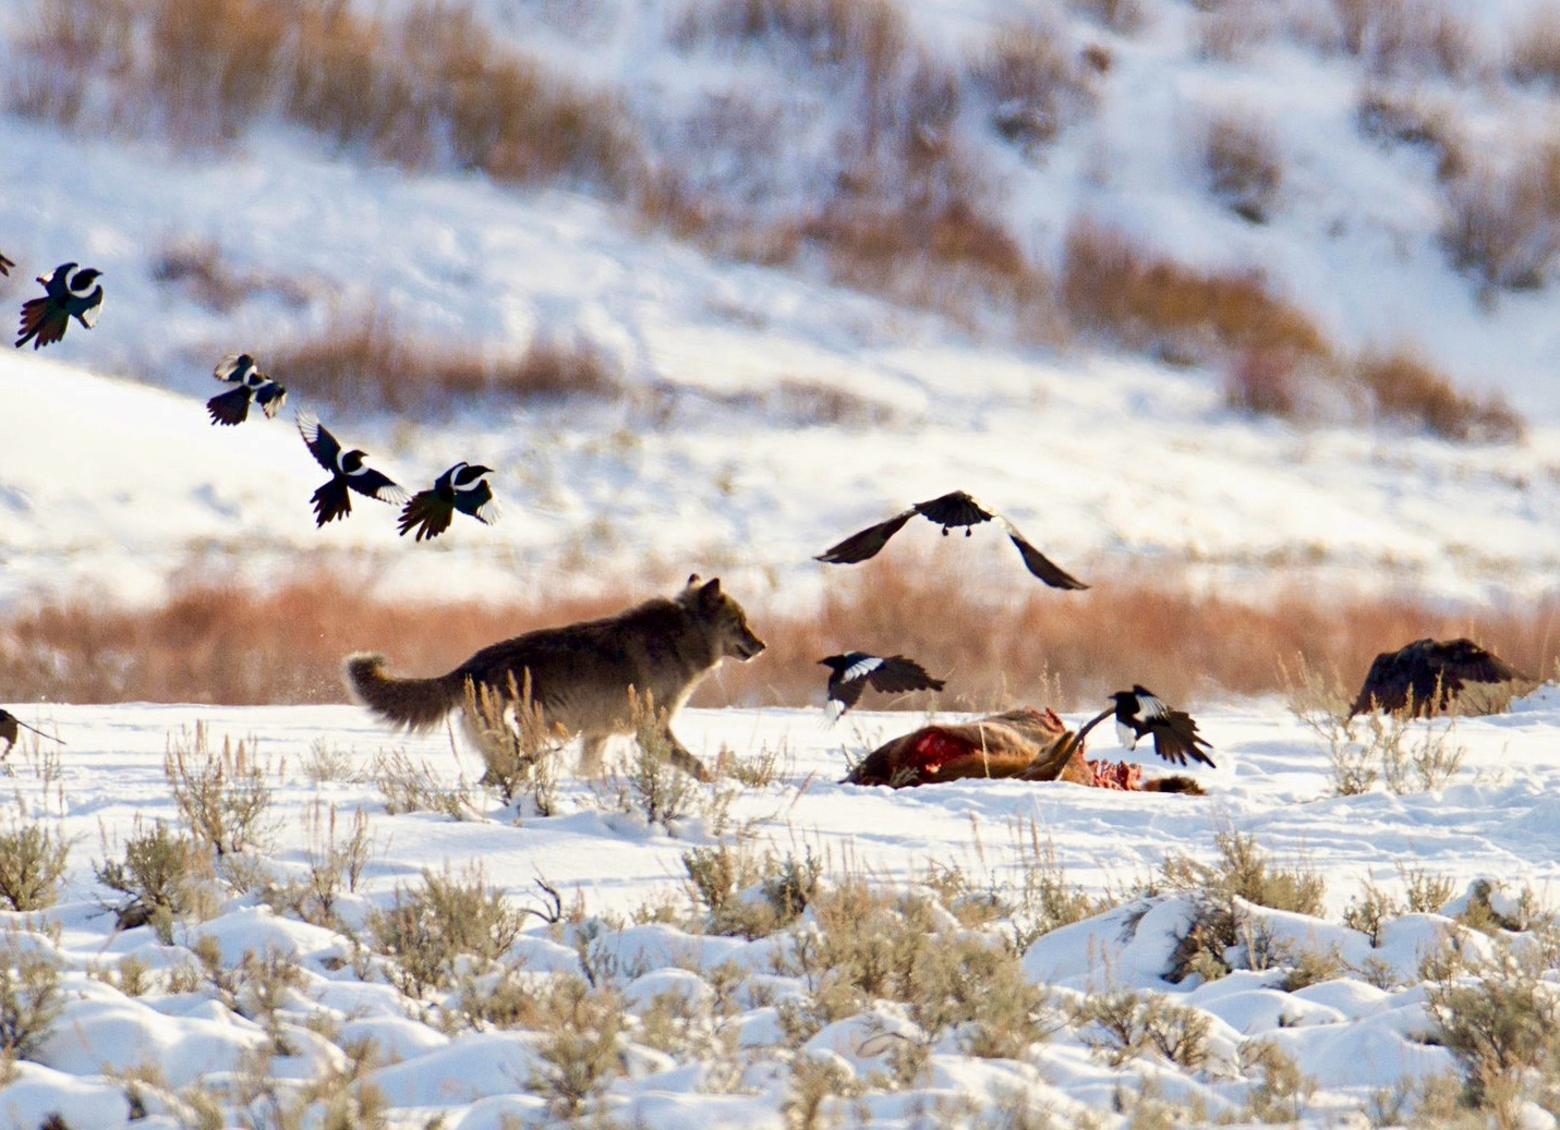 A wolf in Yellowstone joins magpies in feasting upon an elk carcass. Throughout the West, dead animals attract scavengers. In cattle country, experience has shown that conflicts between ranchers and predators can be reduced when dead cattle and sheep, which can attract wolves, bears and mountain lions are removed from rangeland.  Photo courtesy Jim Peaco/NPS